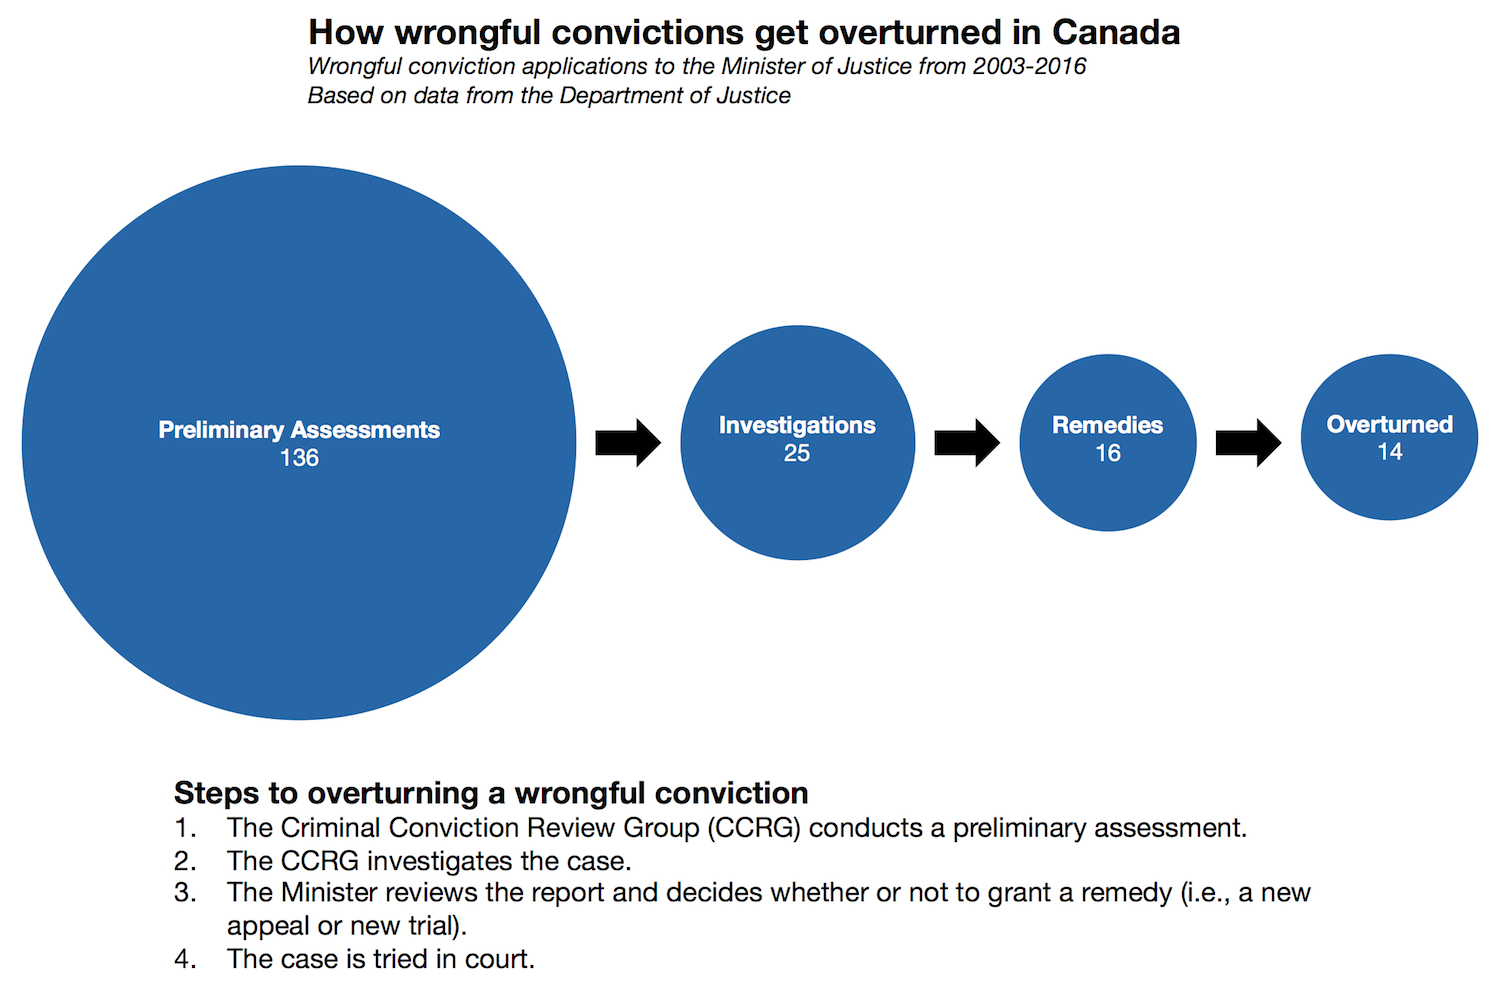 How wrongful convictions get overturned in Canada